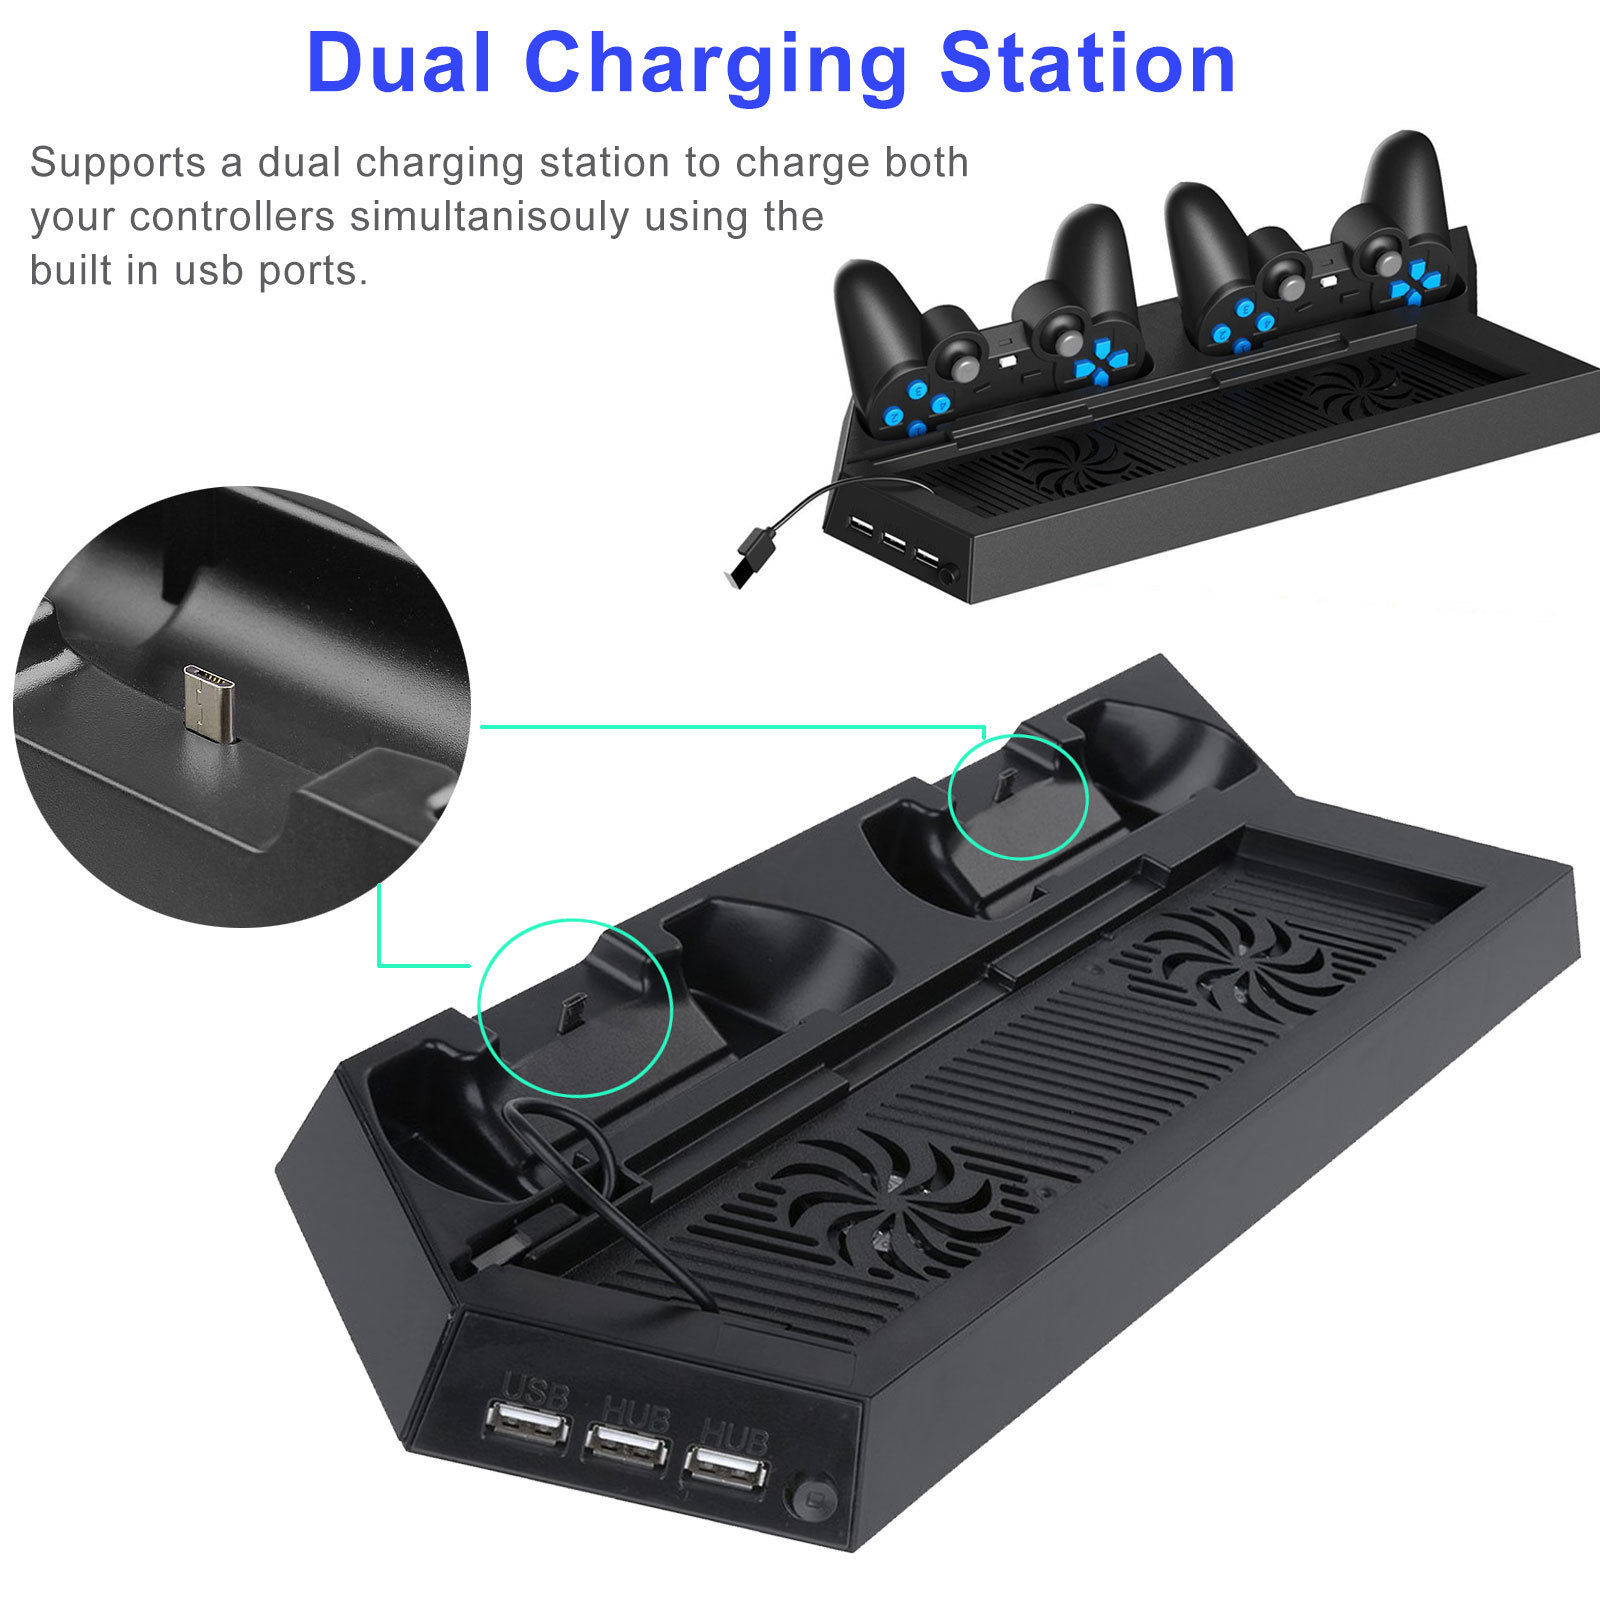 PS4 Cooling Station Vertical Stand with 2 Controller Charging Dock, Black (Not for PS4 Slim/Pro) - image 2 of 9